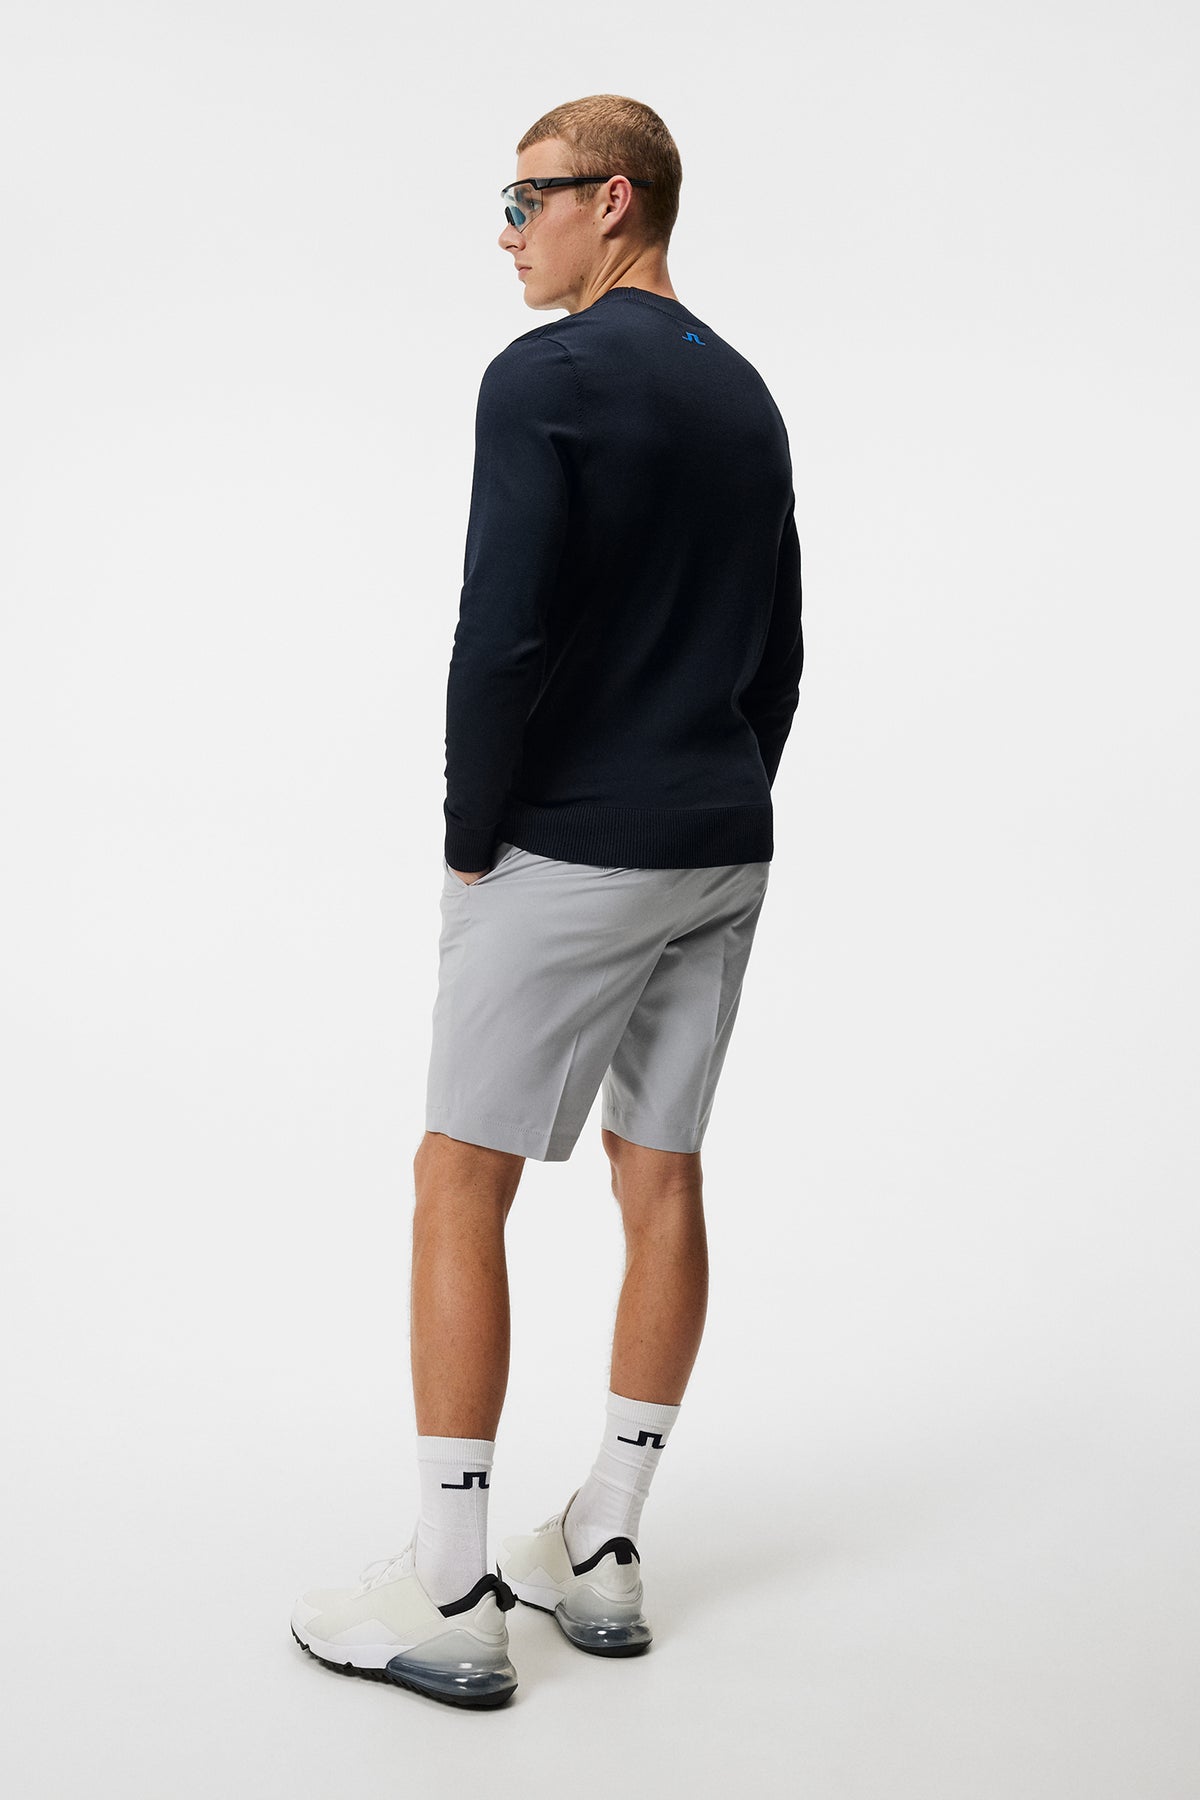 Gus Knitted Sweater / JL Navy – J.Lindeberg